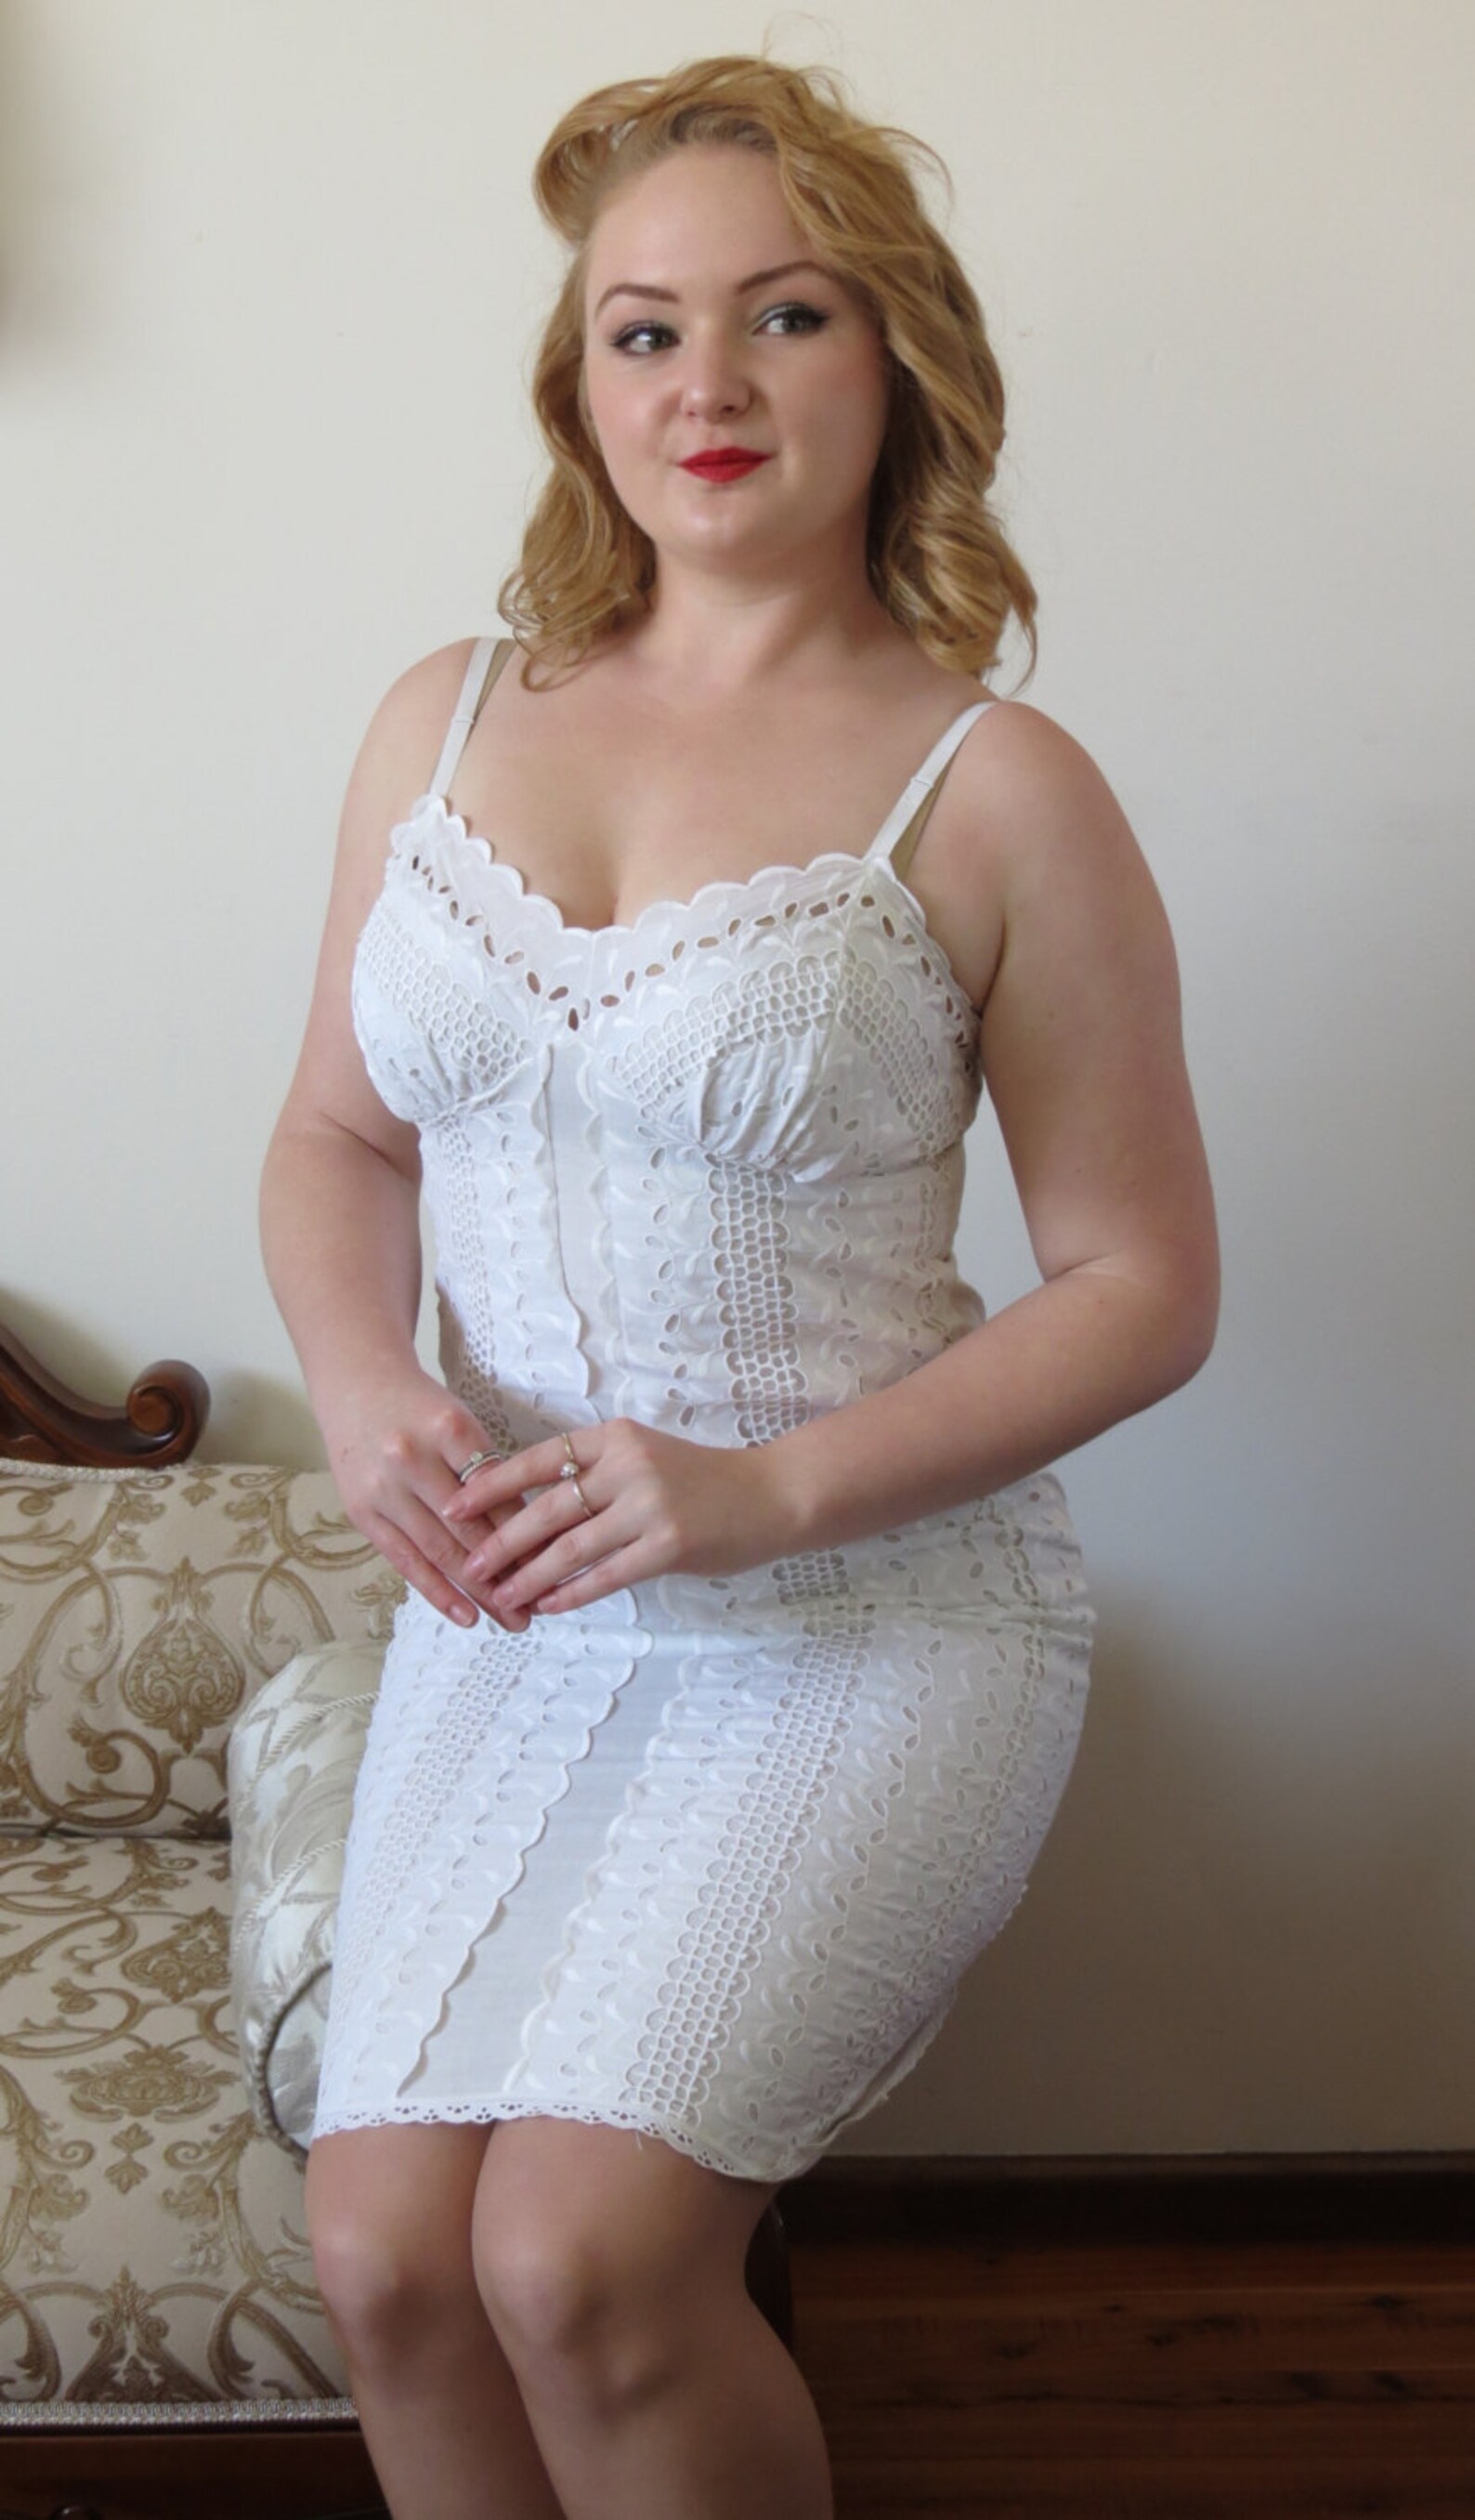 Vintage 1950s Lyn Maid White Cotton Lace Sexy Nightie Lingerie Etsy